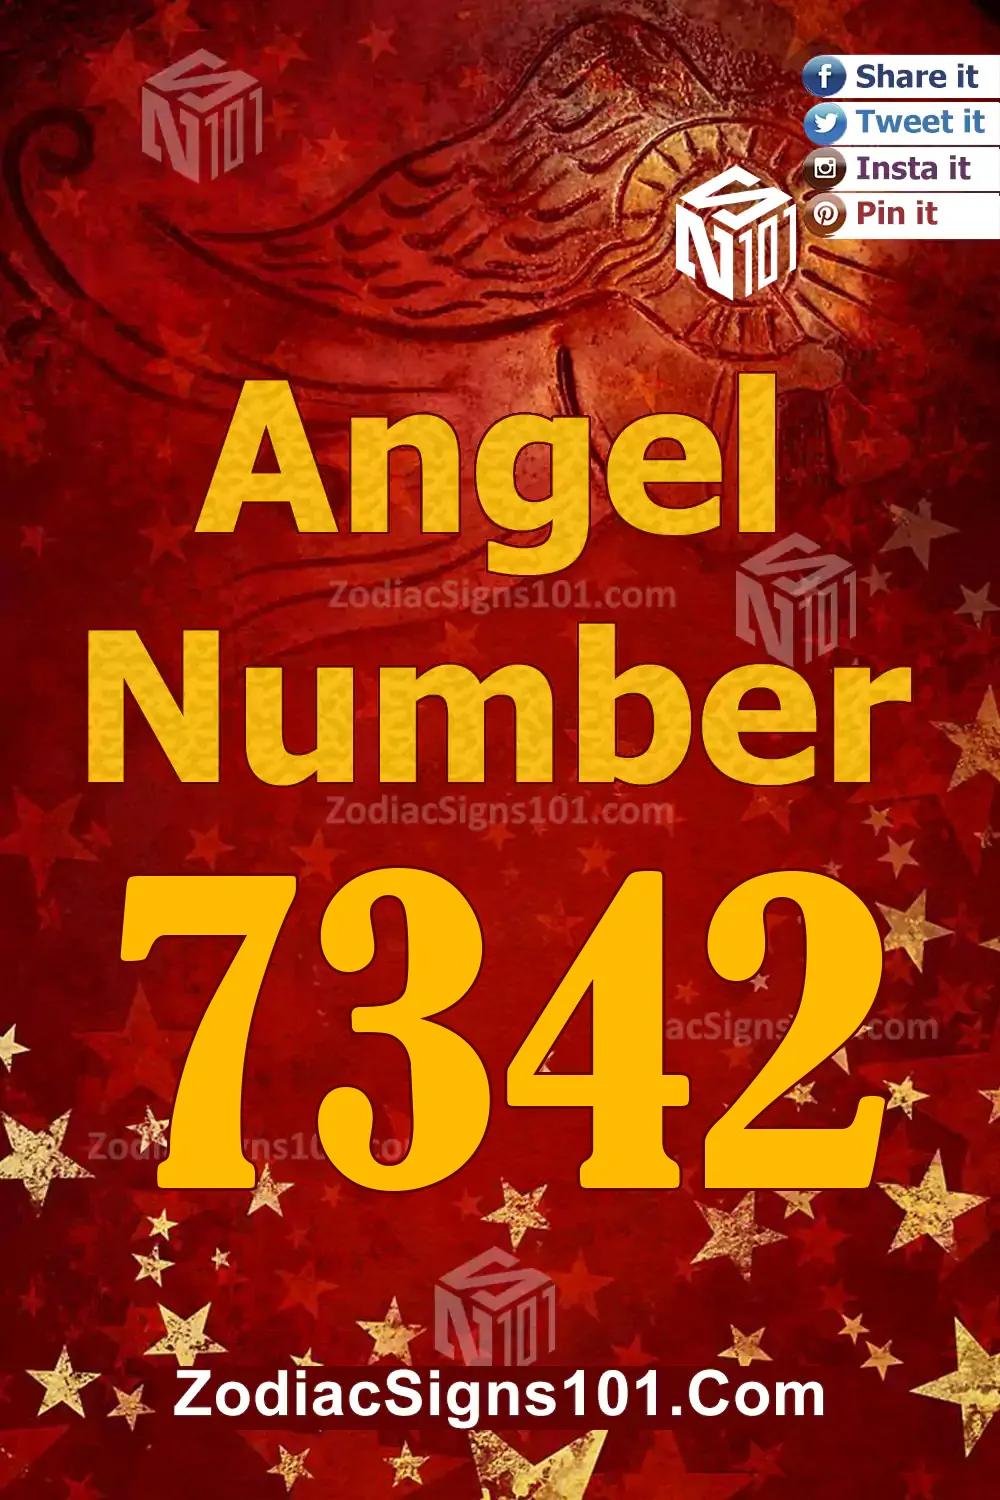 7342 Angel Number Meaning